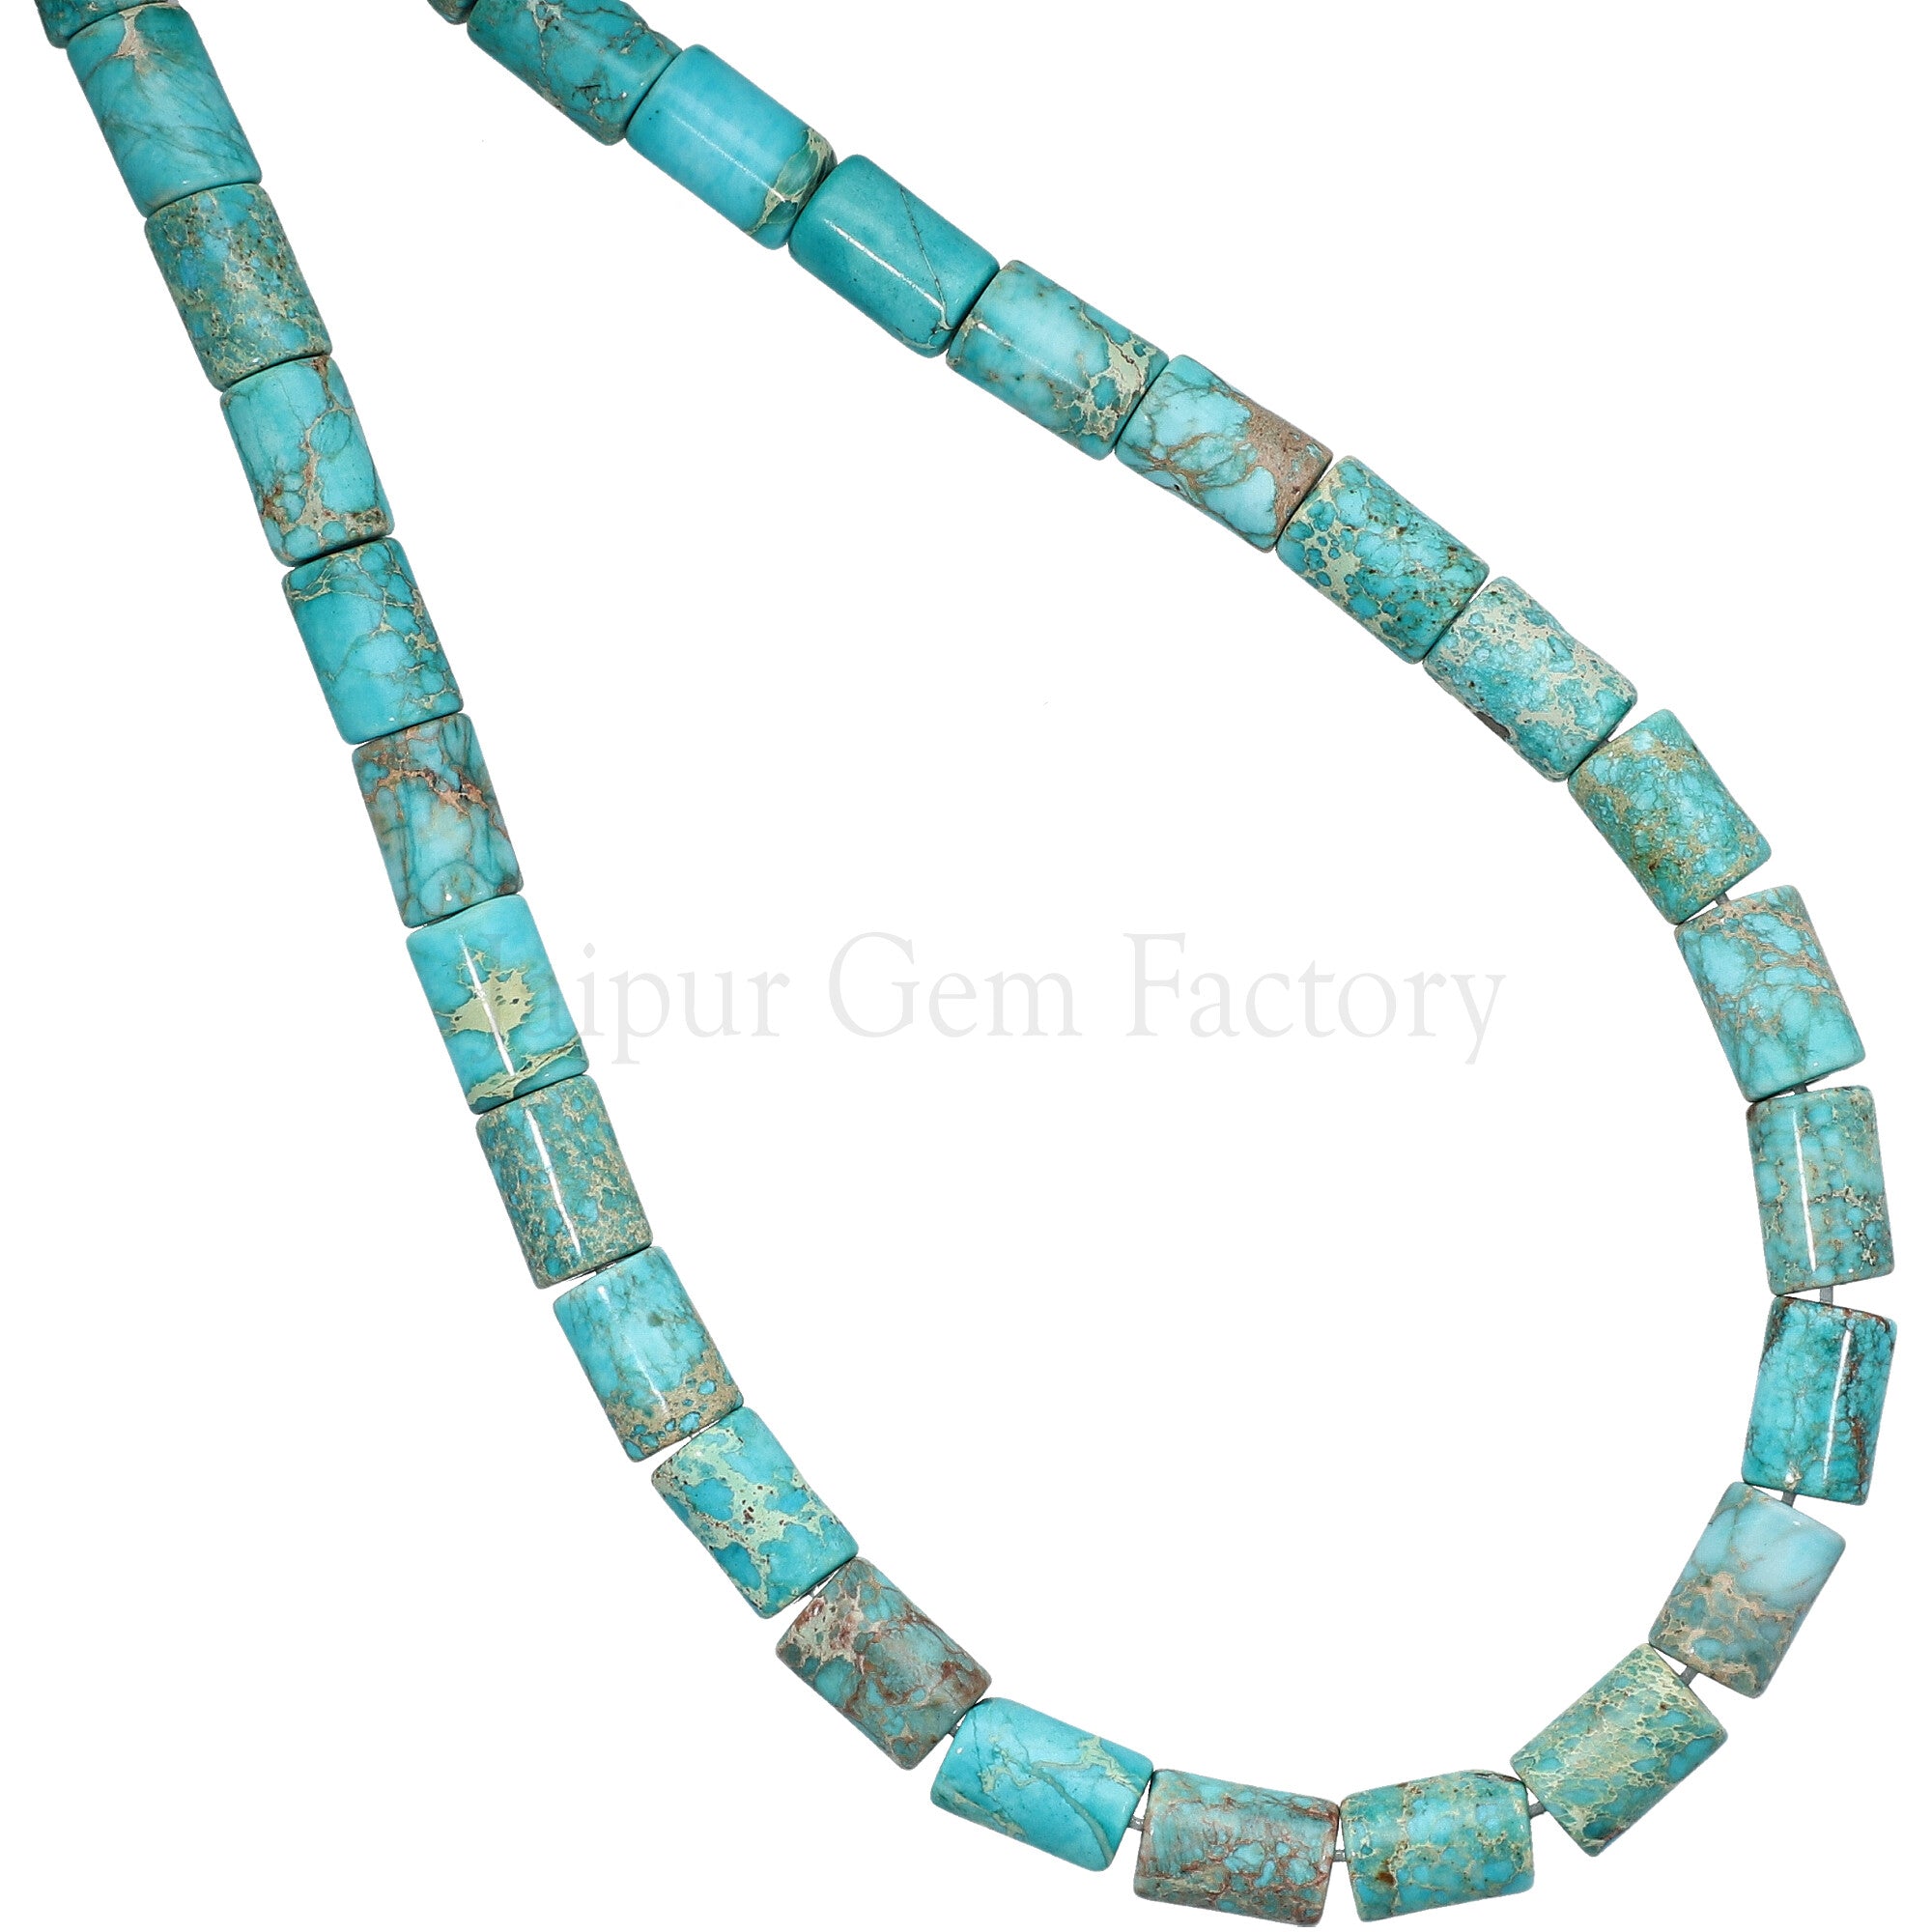 8X6 MM Turquoise Blue Impression Jasper Smooth Tube Beads 15 Inches Strand